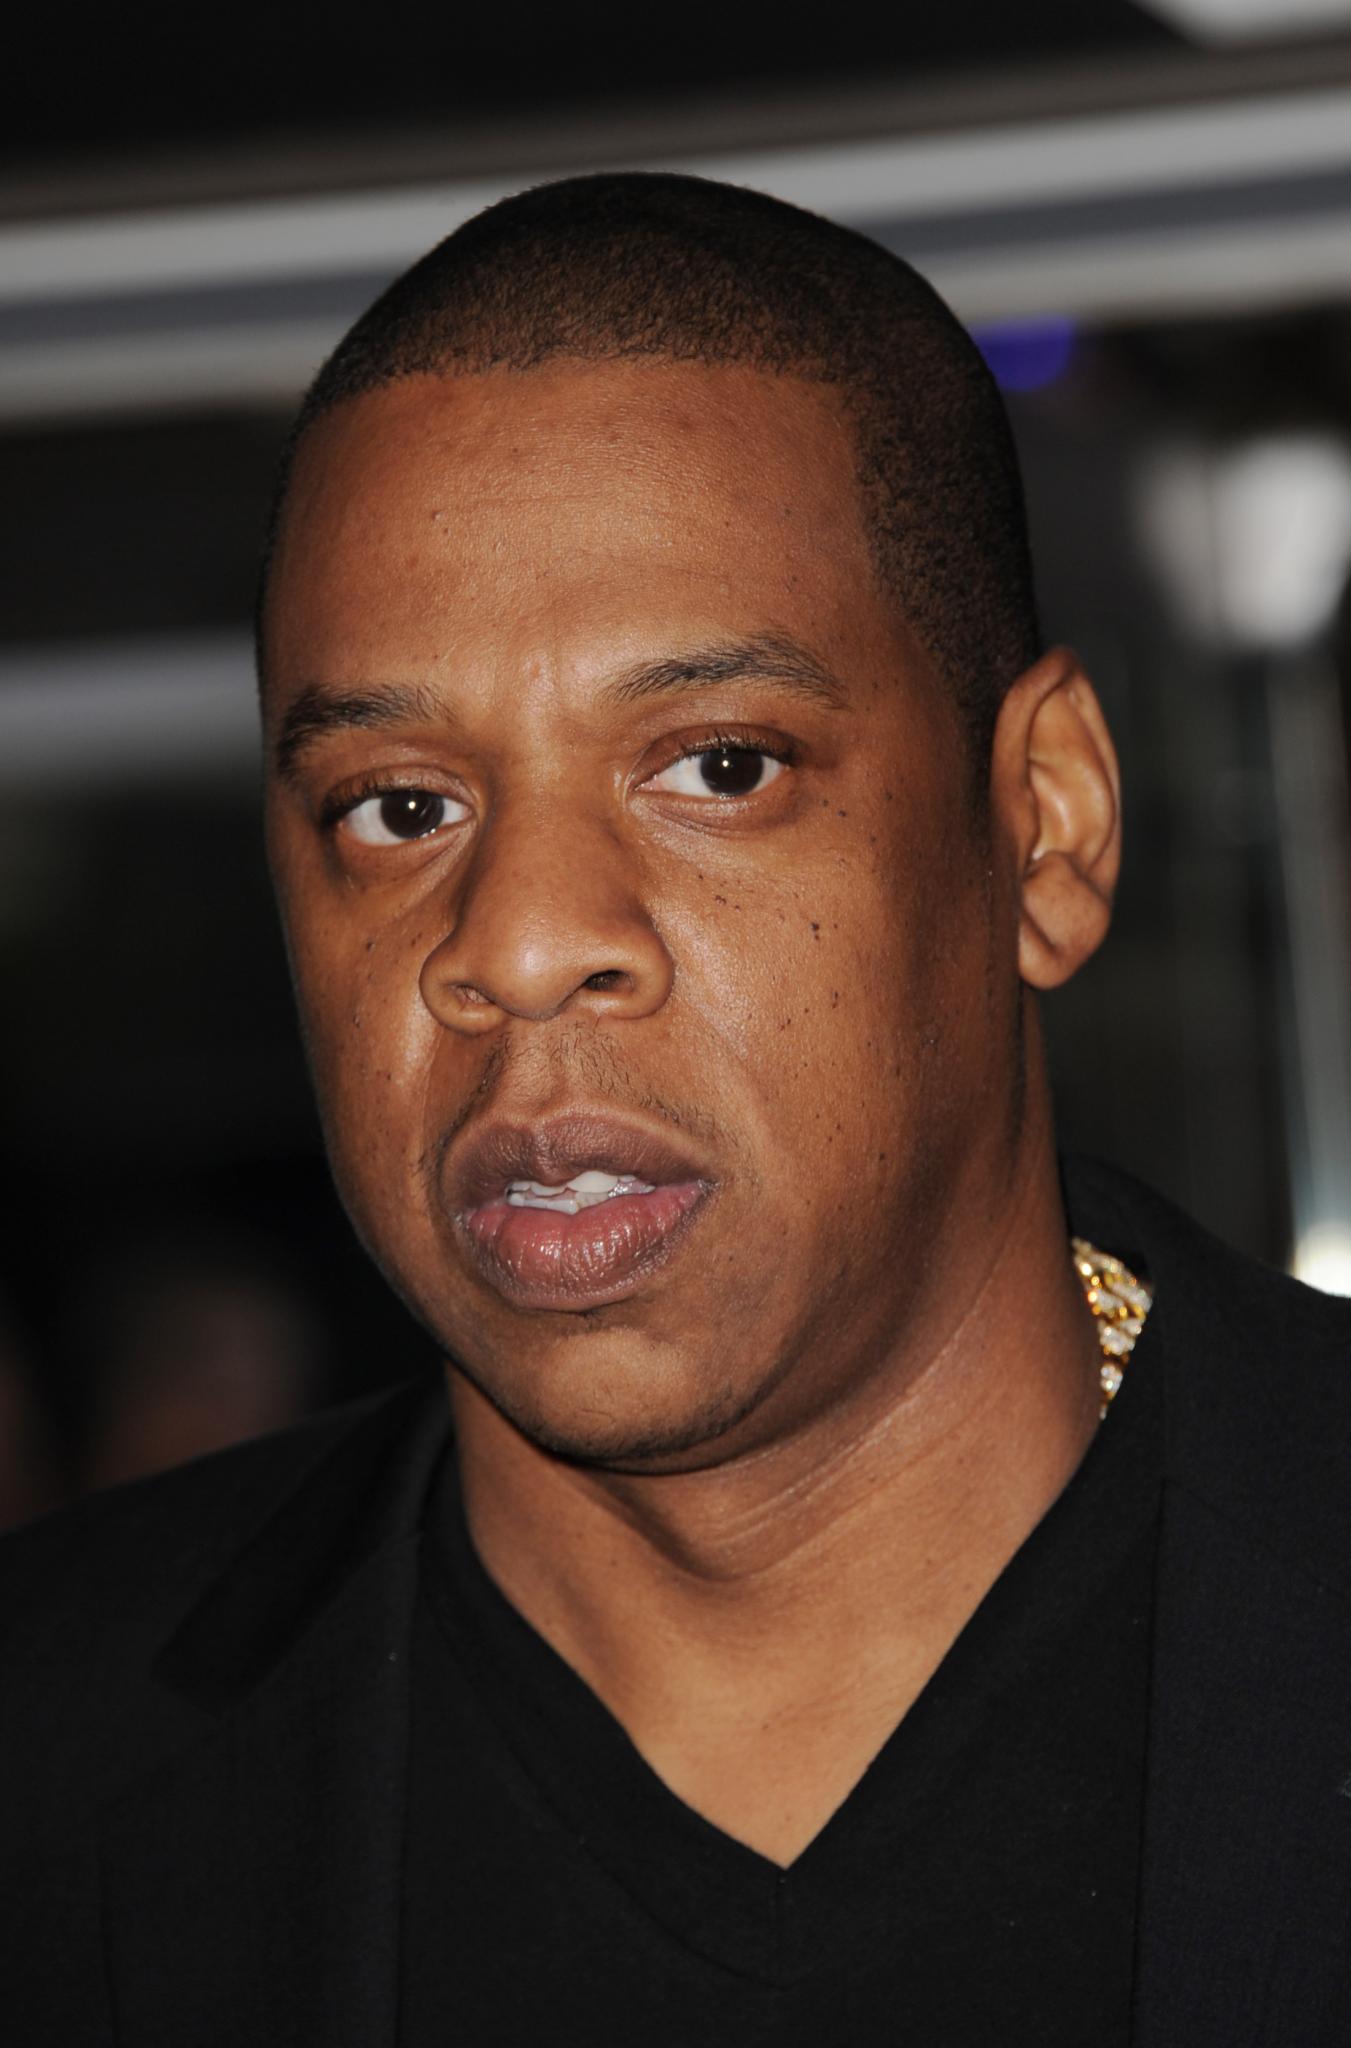 ESSENCE Poll: Should Jay Z Continue His Deal With Barney’s?